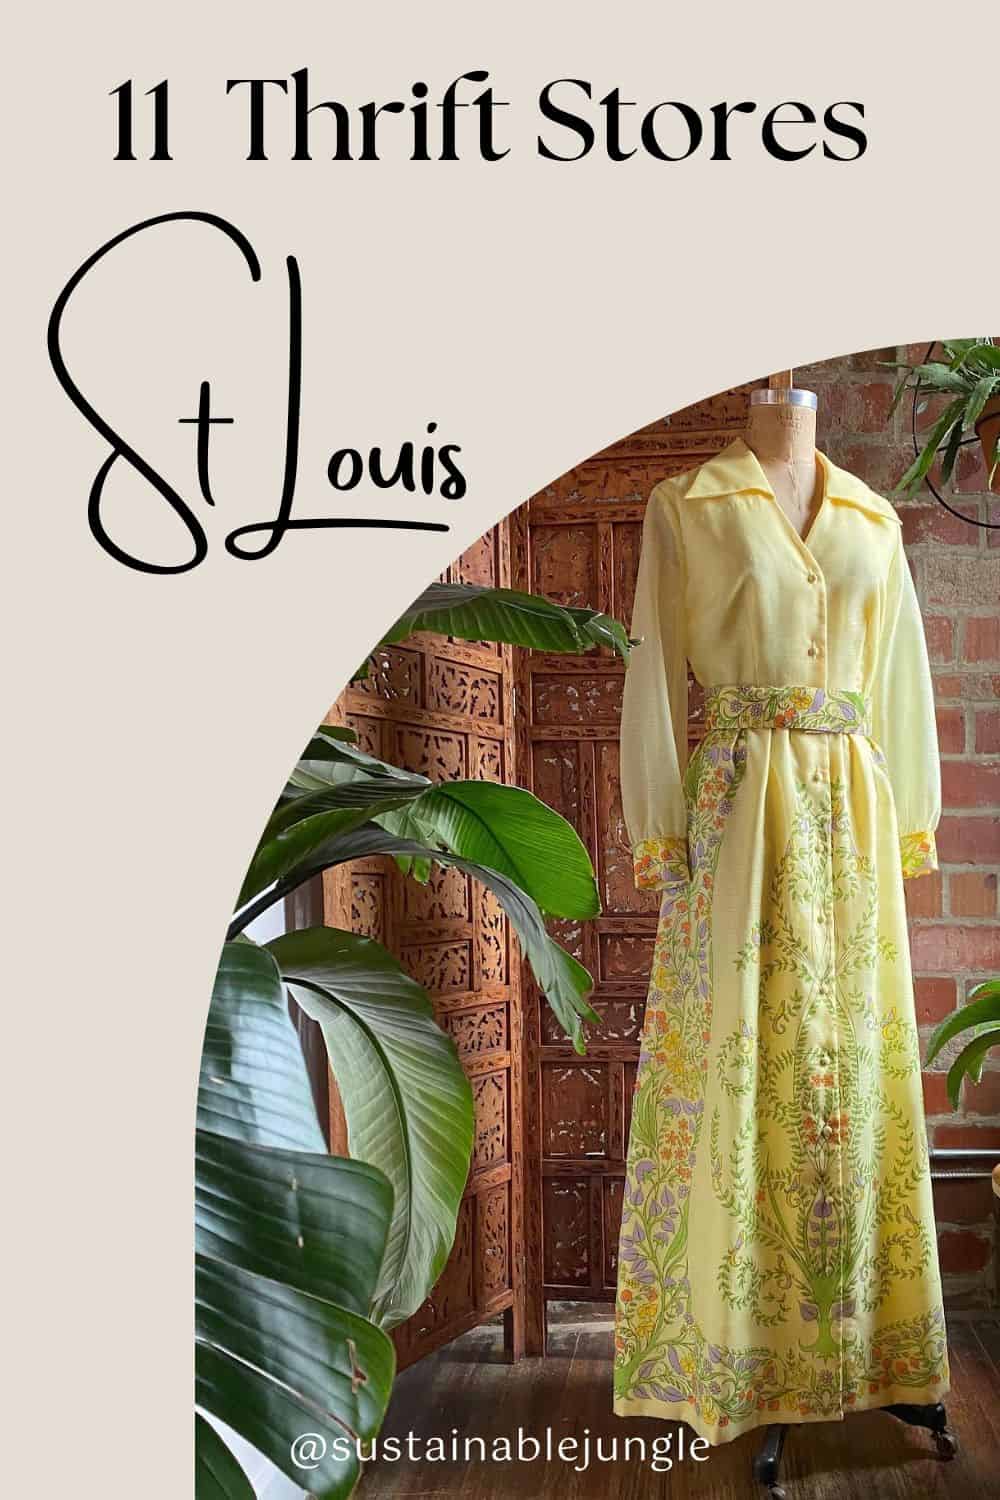 11 Resale & Thrift Stores In St Louis You Won't Want to Miss-ouri Image by May's Place #thriftstoresstlouis #bestthriftstoresinstlouis #thriftstoresstlouismo #stlouisthriftstores #resaleshopsinstlouis #beststlouisthriftstores #sustainablejungle